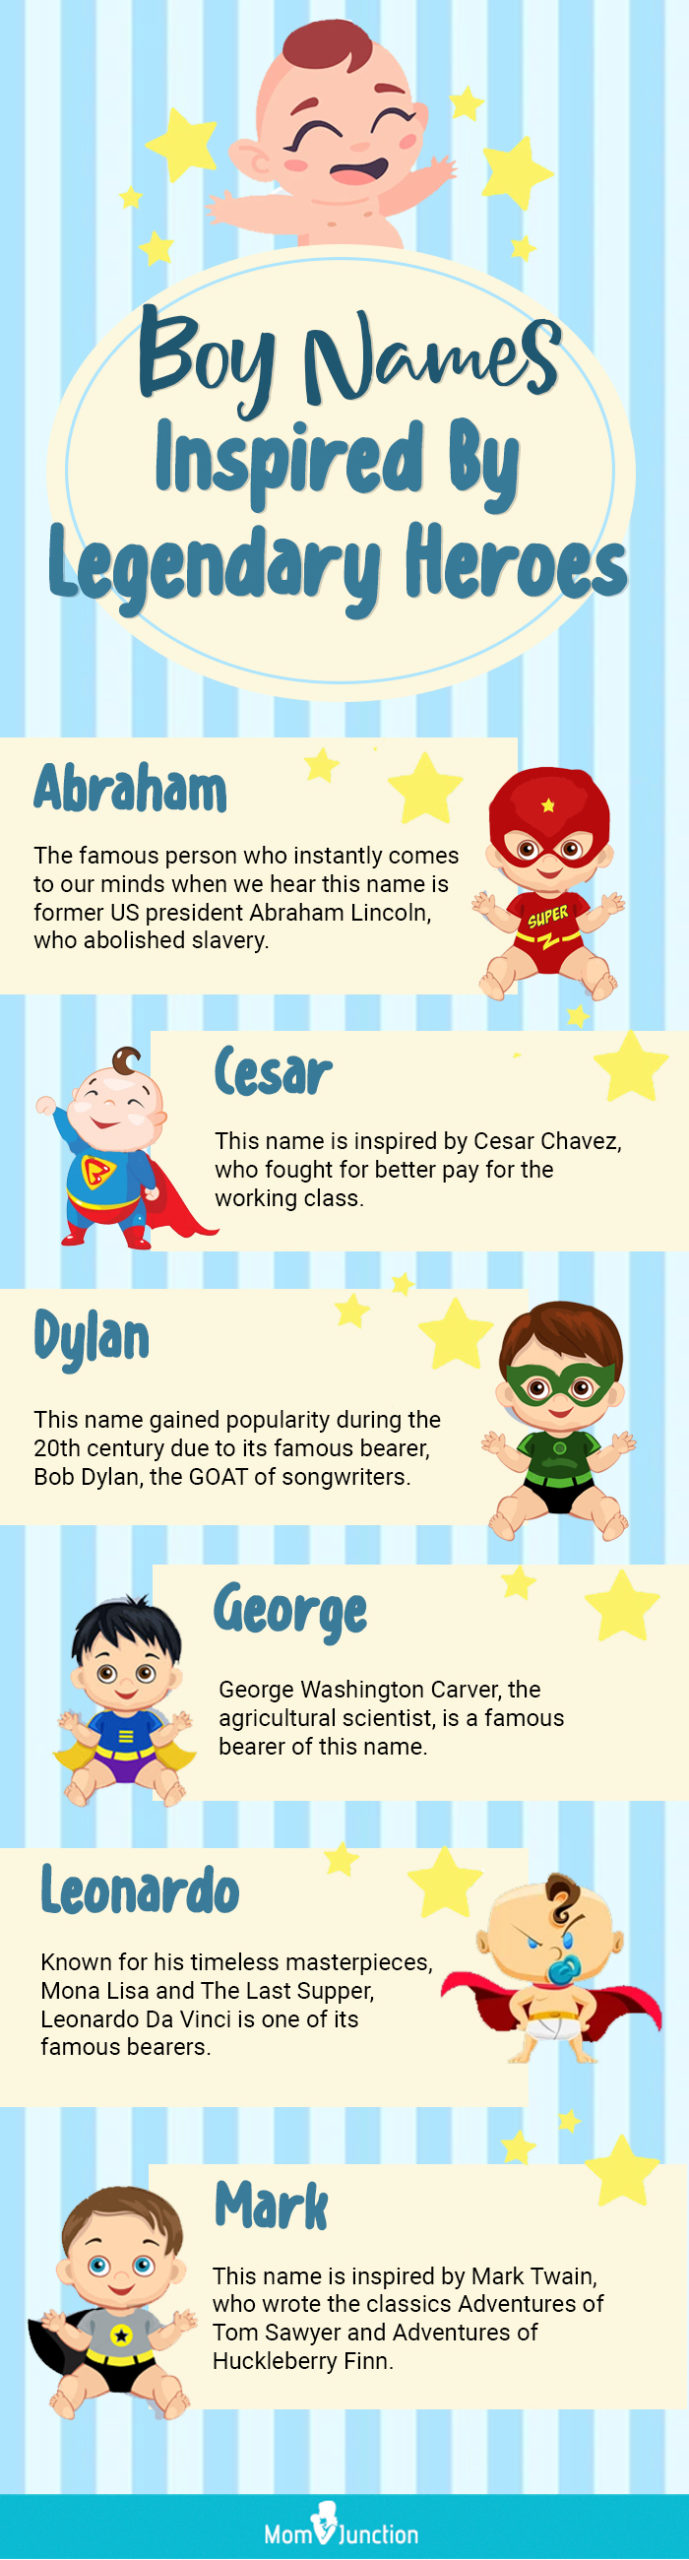 boy names inspired by legendary heroes (infographic)